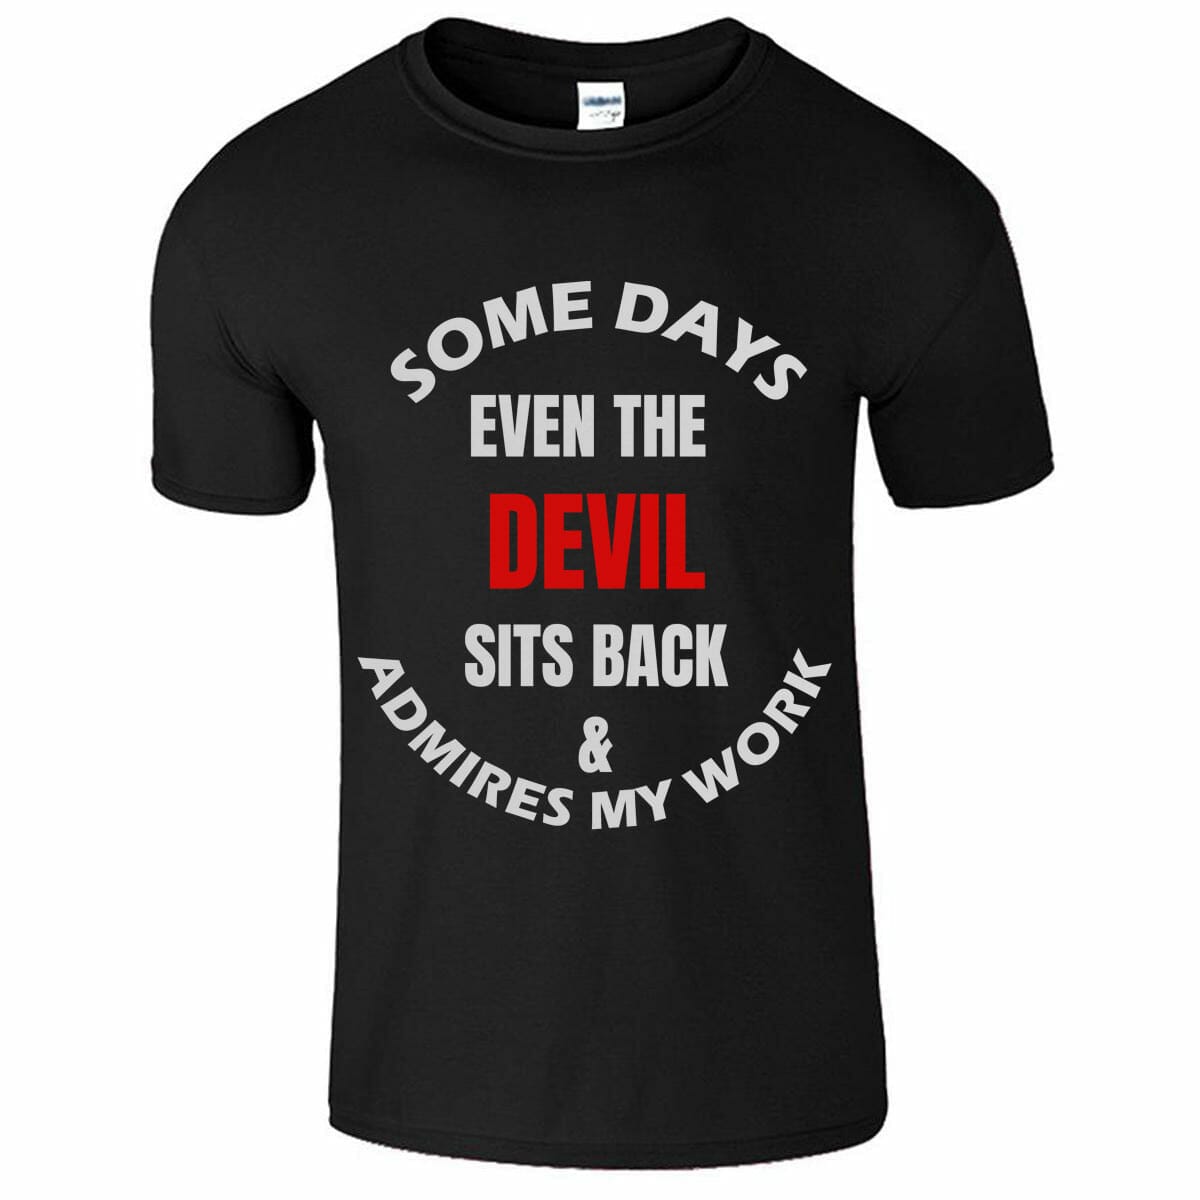 Some Days Even The Devil Sits & Admires My Work Funny T-Shirt Design For Men & Women.